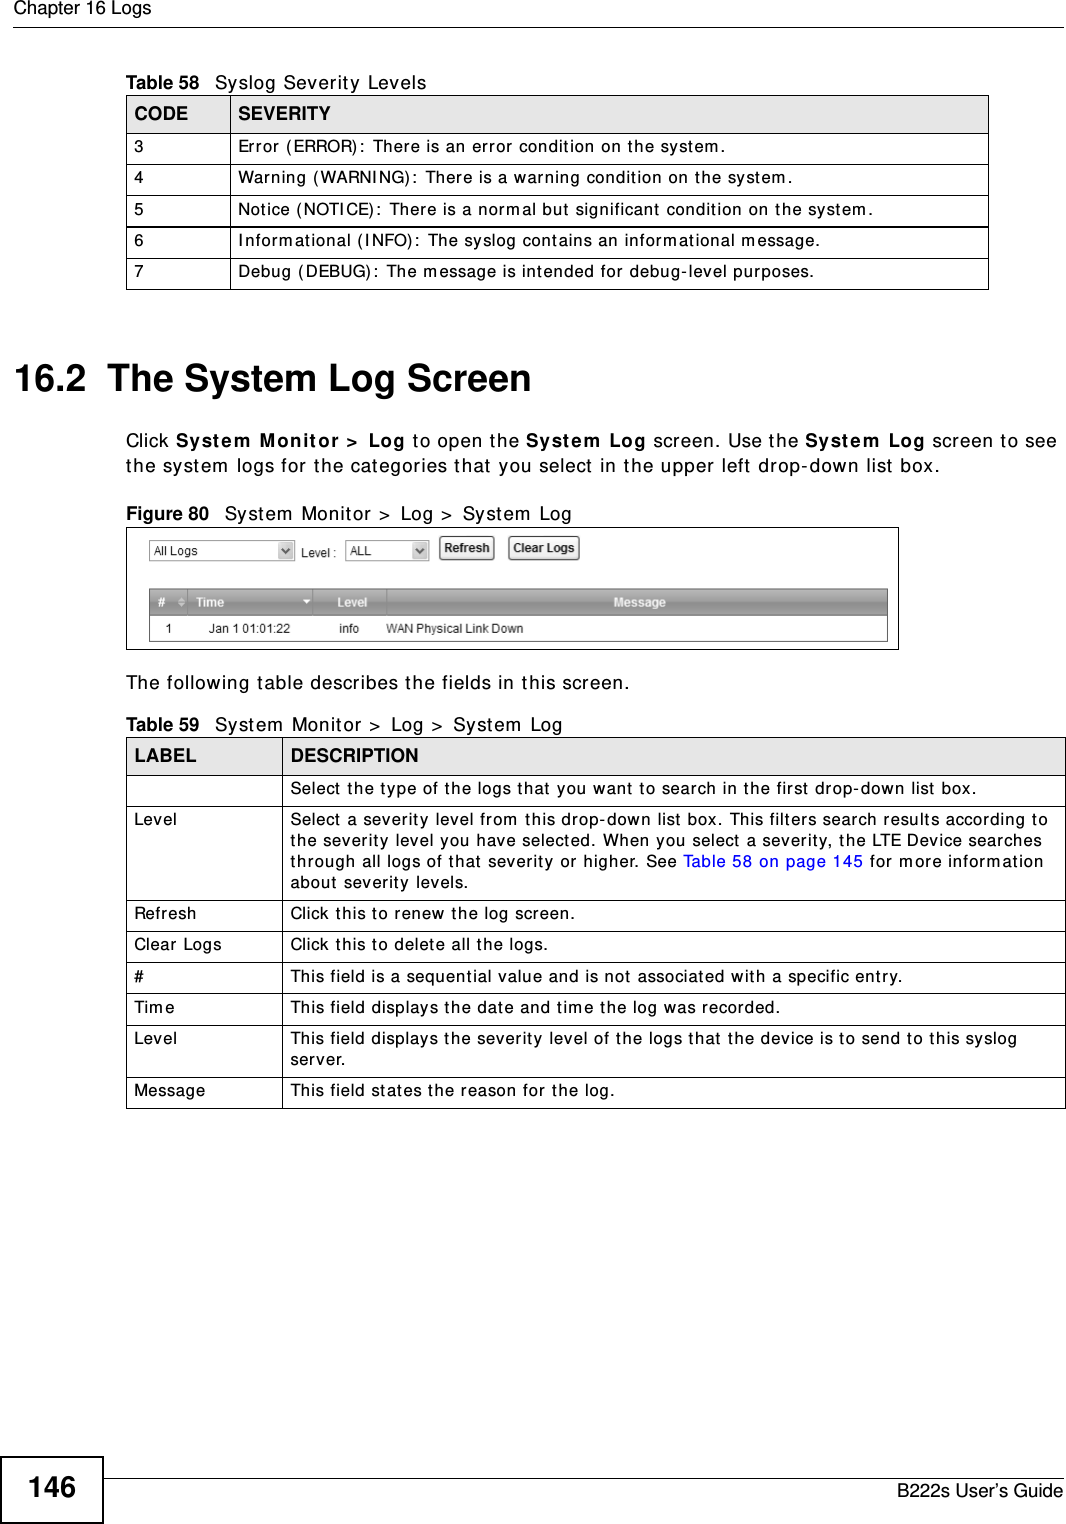 Chapter 16 LogsB222s User’s Guide14616.2  The System Log Screen Click Sy st e m  M on it or  &gt;  Log t o open t he Syst e m  Log screen. Use the Syst em  Log screen t o see the system  logs for the cat egories t hat  you select  in t he upper left drop- down list box. Figure 80   Sy st em  Monit or &gt;  Log &gt;  Sy st em  LogThe following t able describes t he fields in t his screen.  3 Error (ERROR):  There is an error condition on t he syst em .4 Warning ( WARNI NG):  There is a warning condit ion on t he system .5 Not ice (NOTI CE) :  There is a norm al but  significant  condition on t he syst em .6 I nform at ional (I NFO):  The syslog cont ains an inform at ional m essage.7 Debug ( DEBUG) :  The m essage is int ended for debug- level purposes.Table 58   Syslog Severit y LevelsCODE SEVERITYTable 59   Syst em  Monit or  &gt;  Log &gt;  Syst em  LogLABEL DESCRIPTIONSelect t he t ype of t he logs t hat  you want  t o search in t he first  drop- dow n list box.Level  Select  a severit y level from  t his drop- dow n list box. This filt ers sear ch result s accor ding t o the severit y level you have selected. When you select a severity, t he LTE Device sear ches through all logs of t hat  severit y or higher. See Table 58 on page 145 for m or e inform at ion about  severit y  levels.Refresh Click t his t o renew t he log screen. Clear Logs Click this t o delete all t he logs. #This field is a sequent ial value and is not  associated with a specific ent ry.Tim e  This field displays t he date and tim e t he log was recorded. Level This field displays the severit y level of t he logs that  t he device is to send to t his syslog server.Message This field stat es t he reason for t he log.